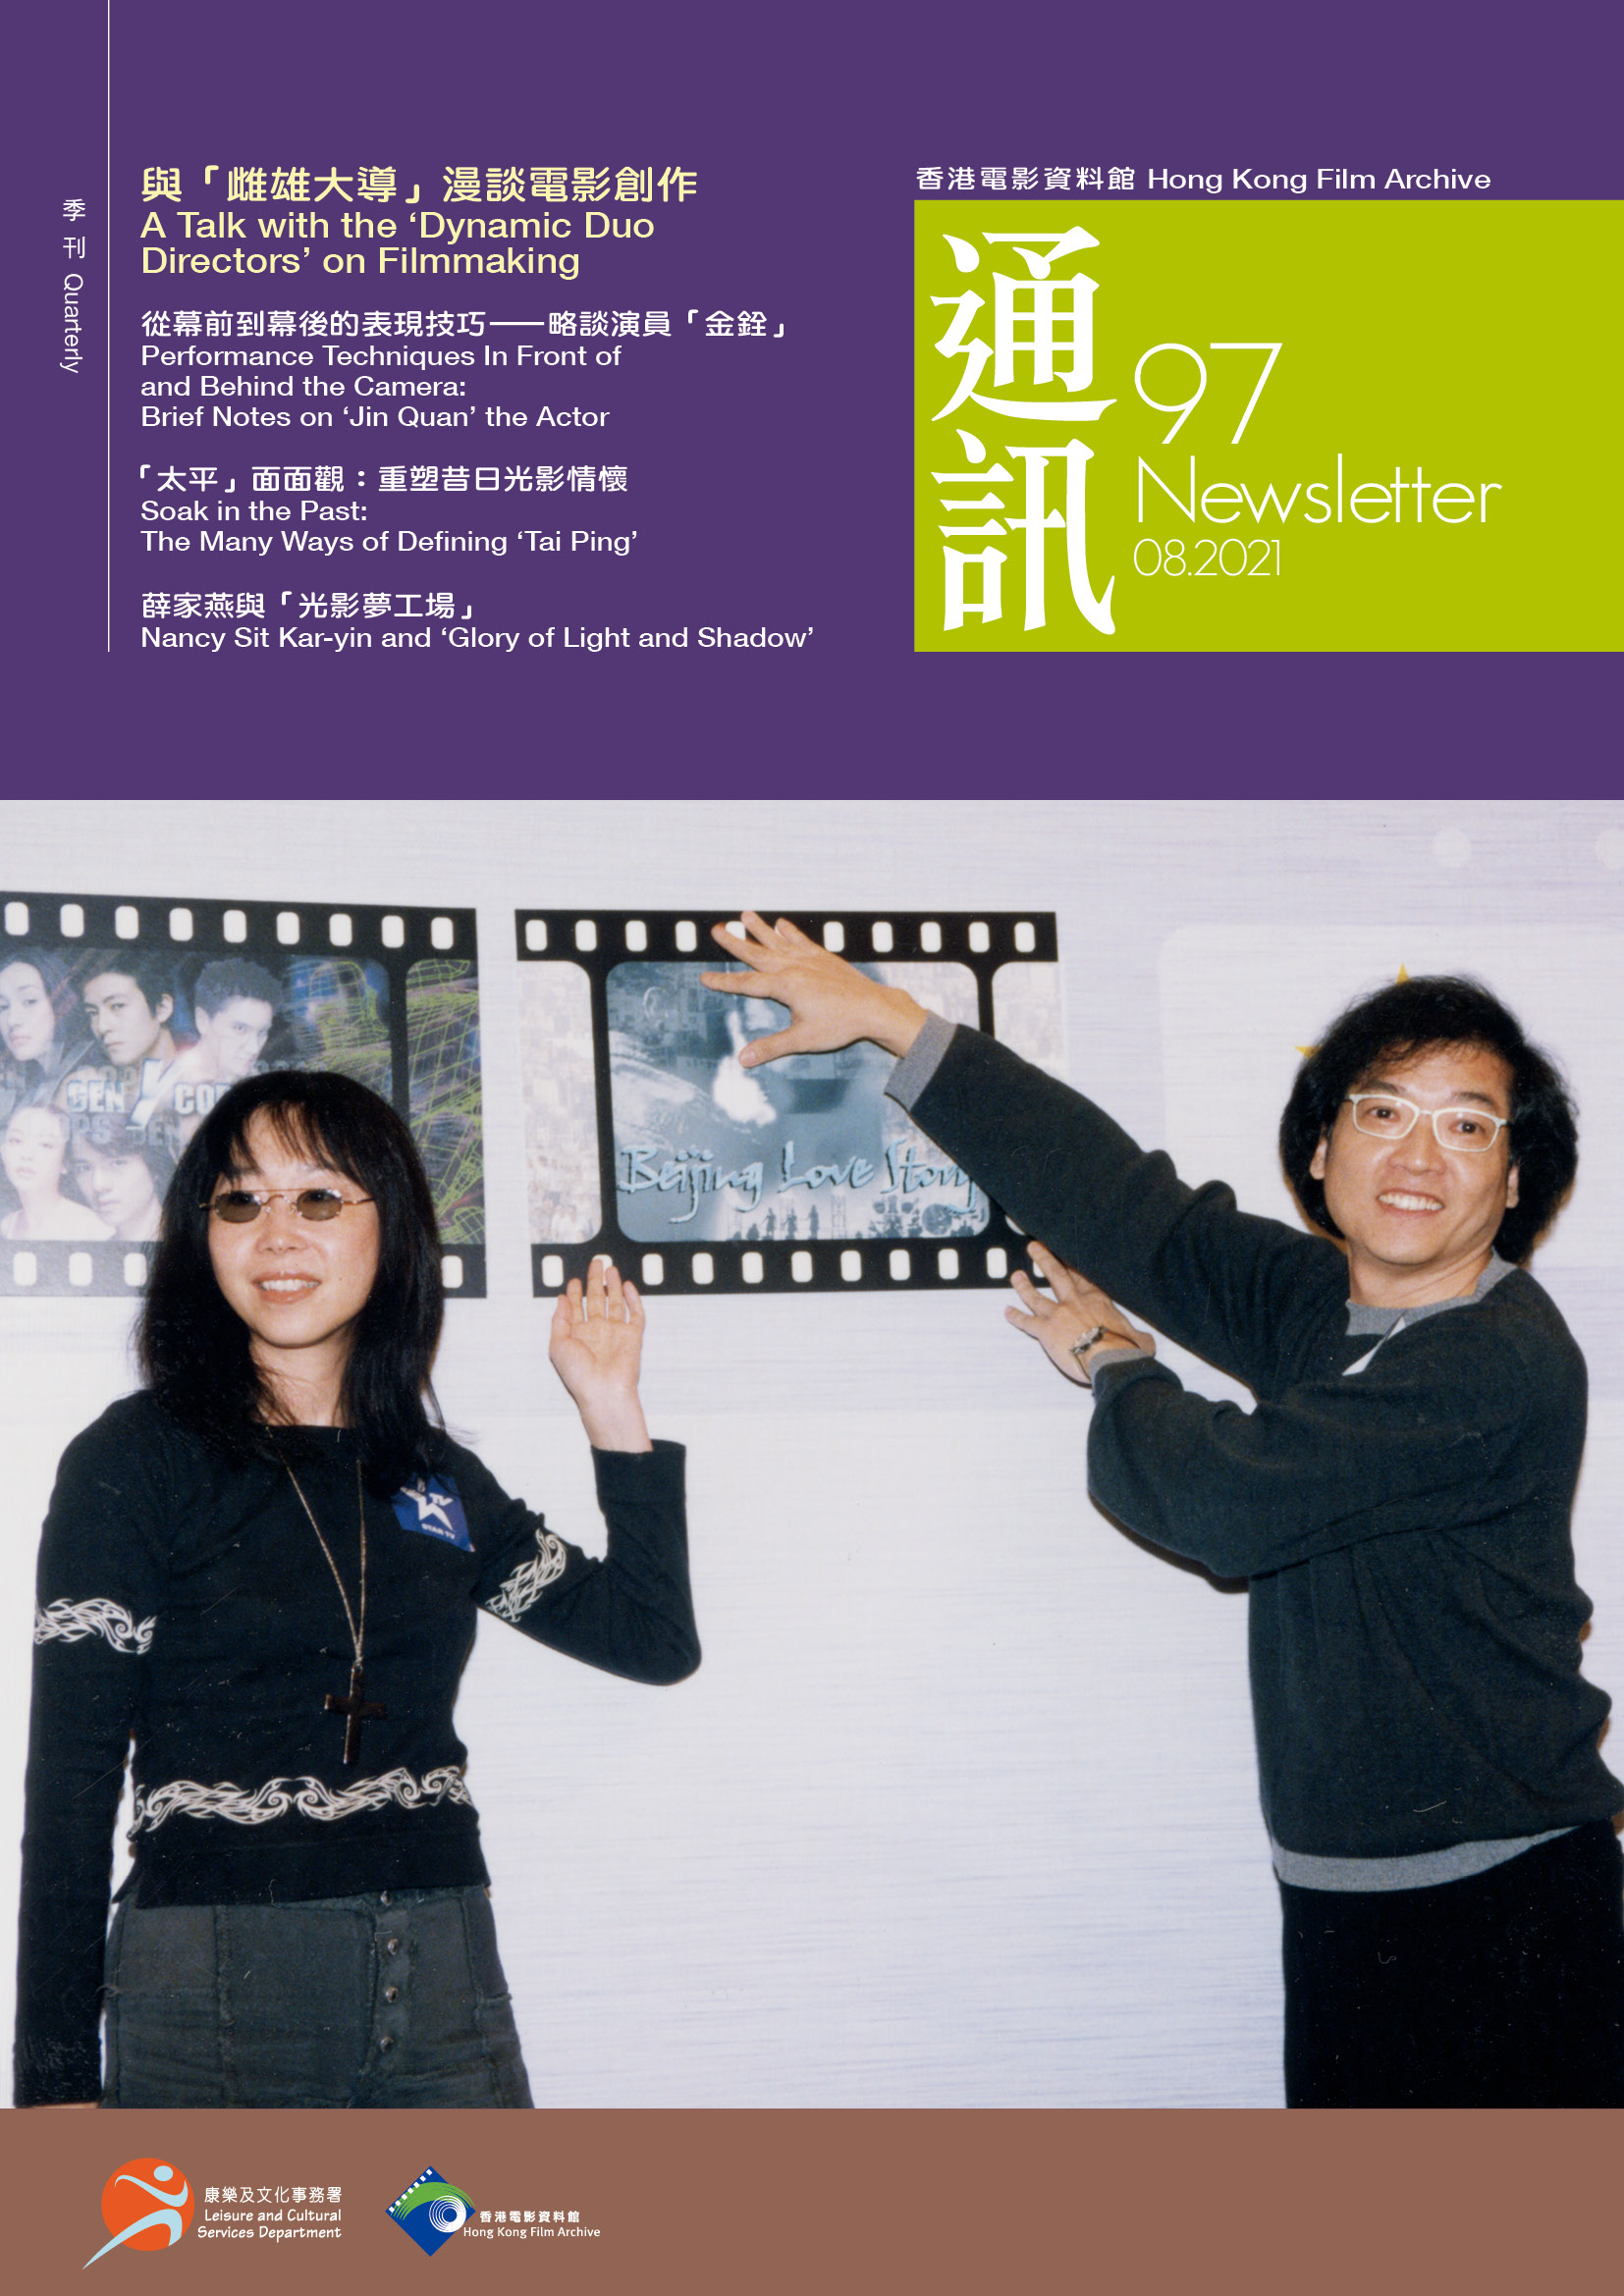 HKFA Newsletter Issue 97 Cover